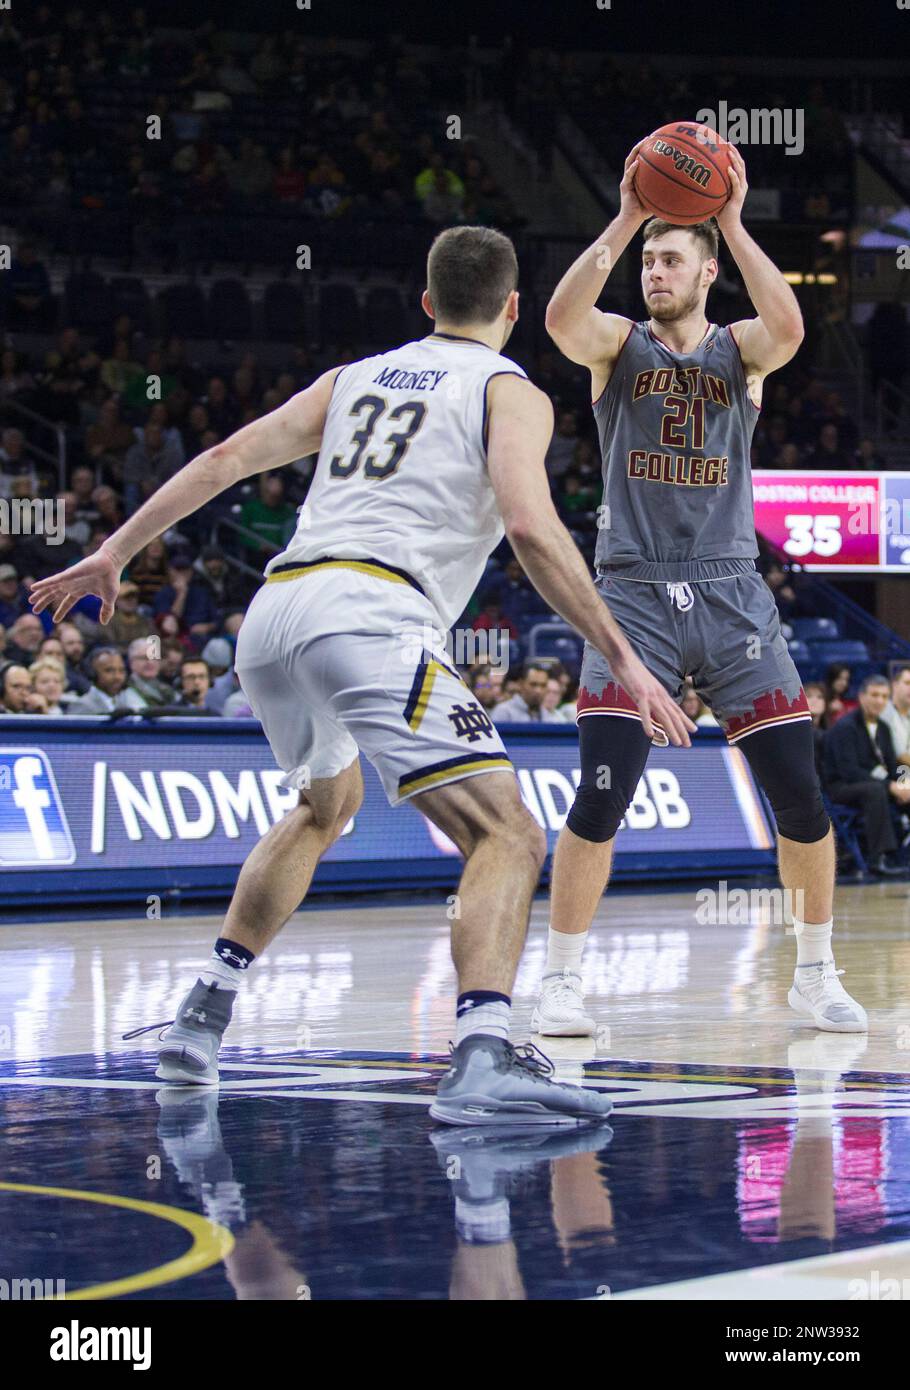 January 12, 2019: Boston College forward Nik Popovic (21) passes the ball  as Notre Dame forward John Mooney (33) defends during NCAA Basketball game  action between the Boston College Eagles and the